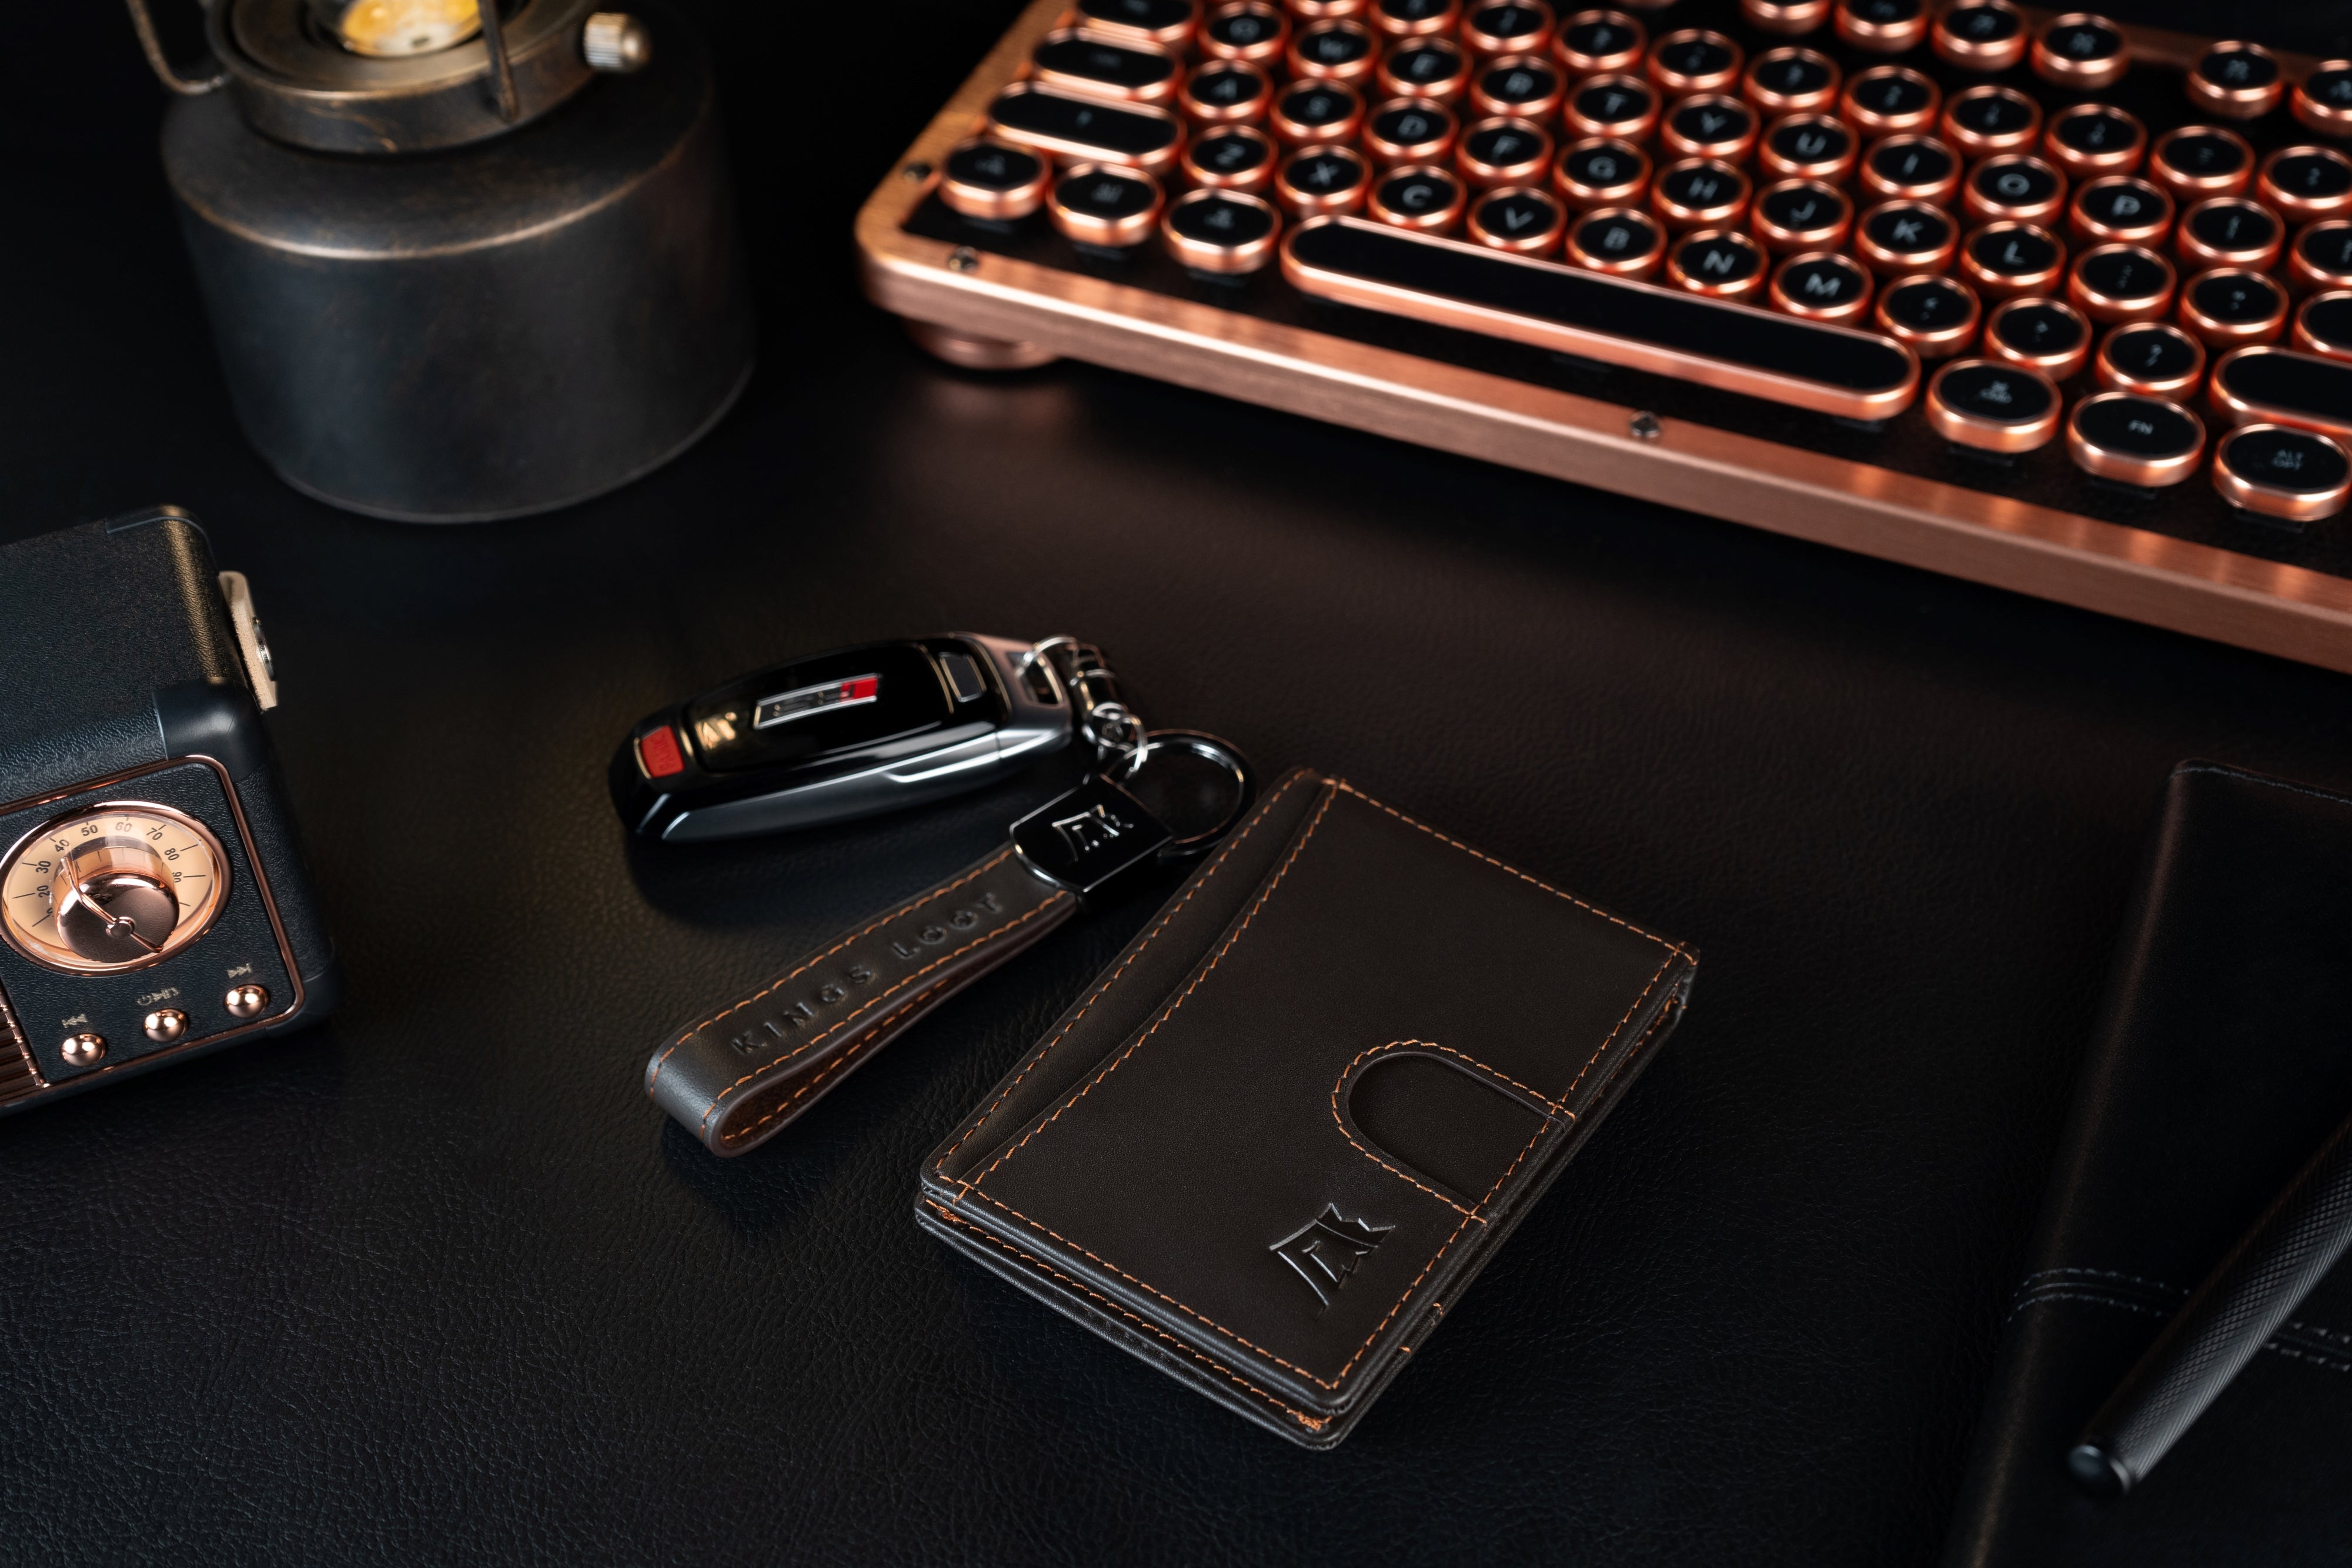 Elegant everyday items including a typewriter keyboard, wallet, lighter, car keys, and a notebook on a dark surface.